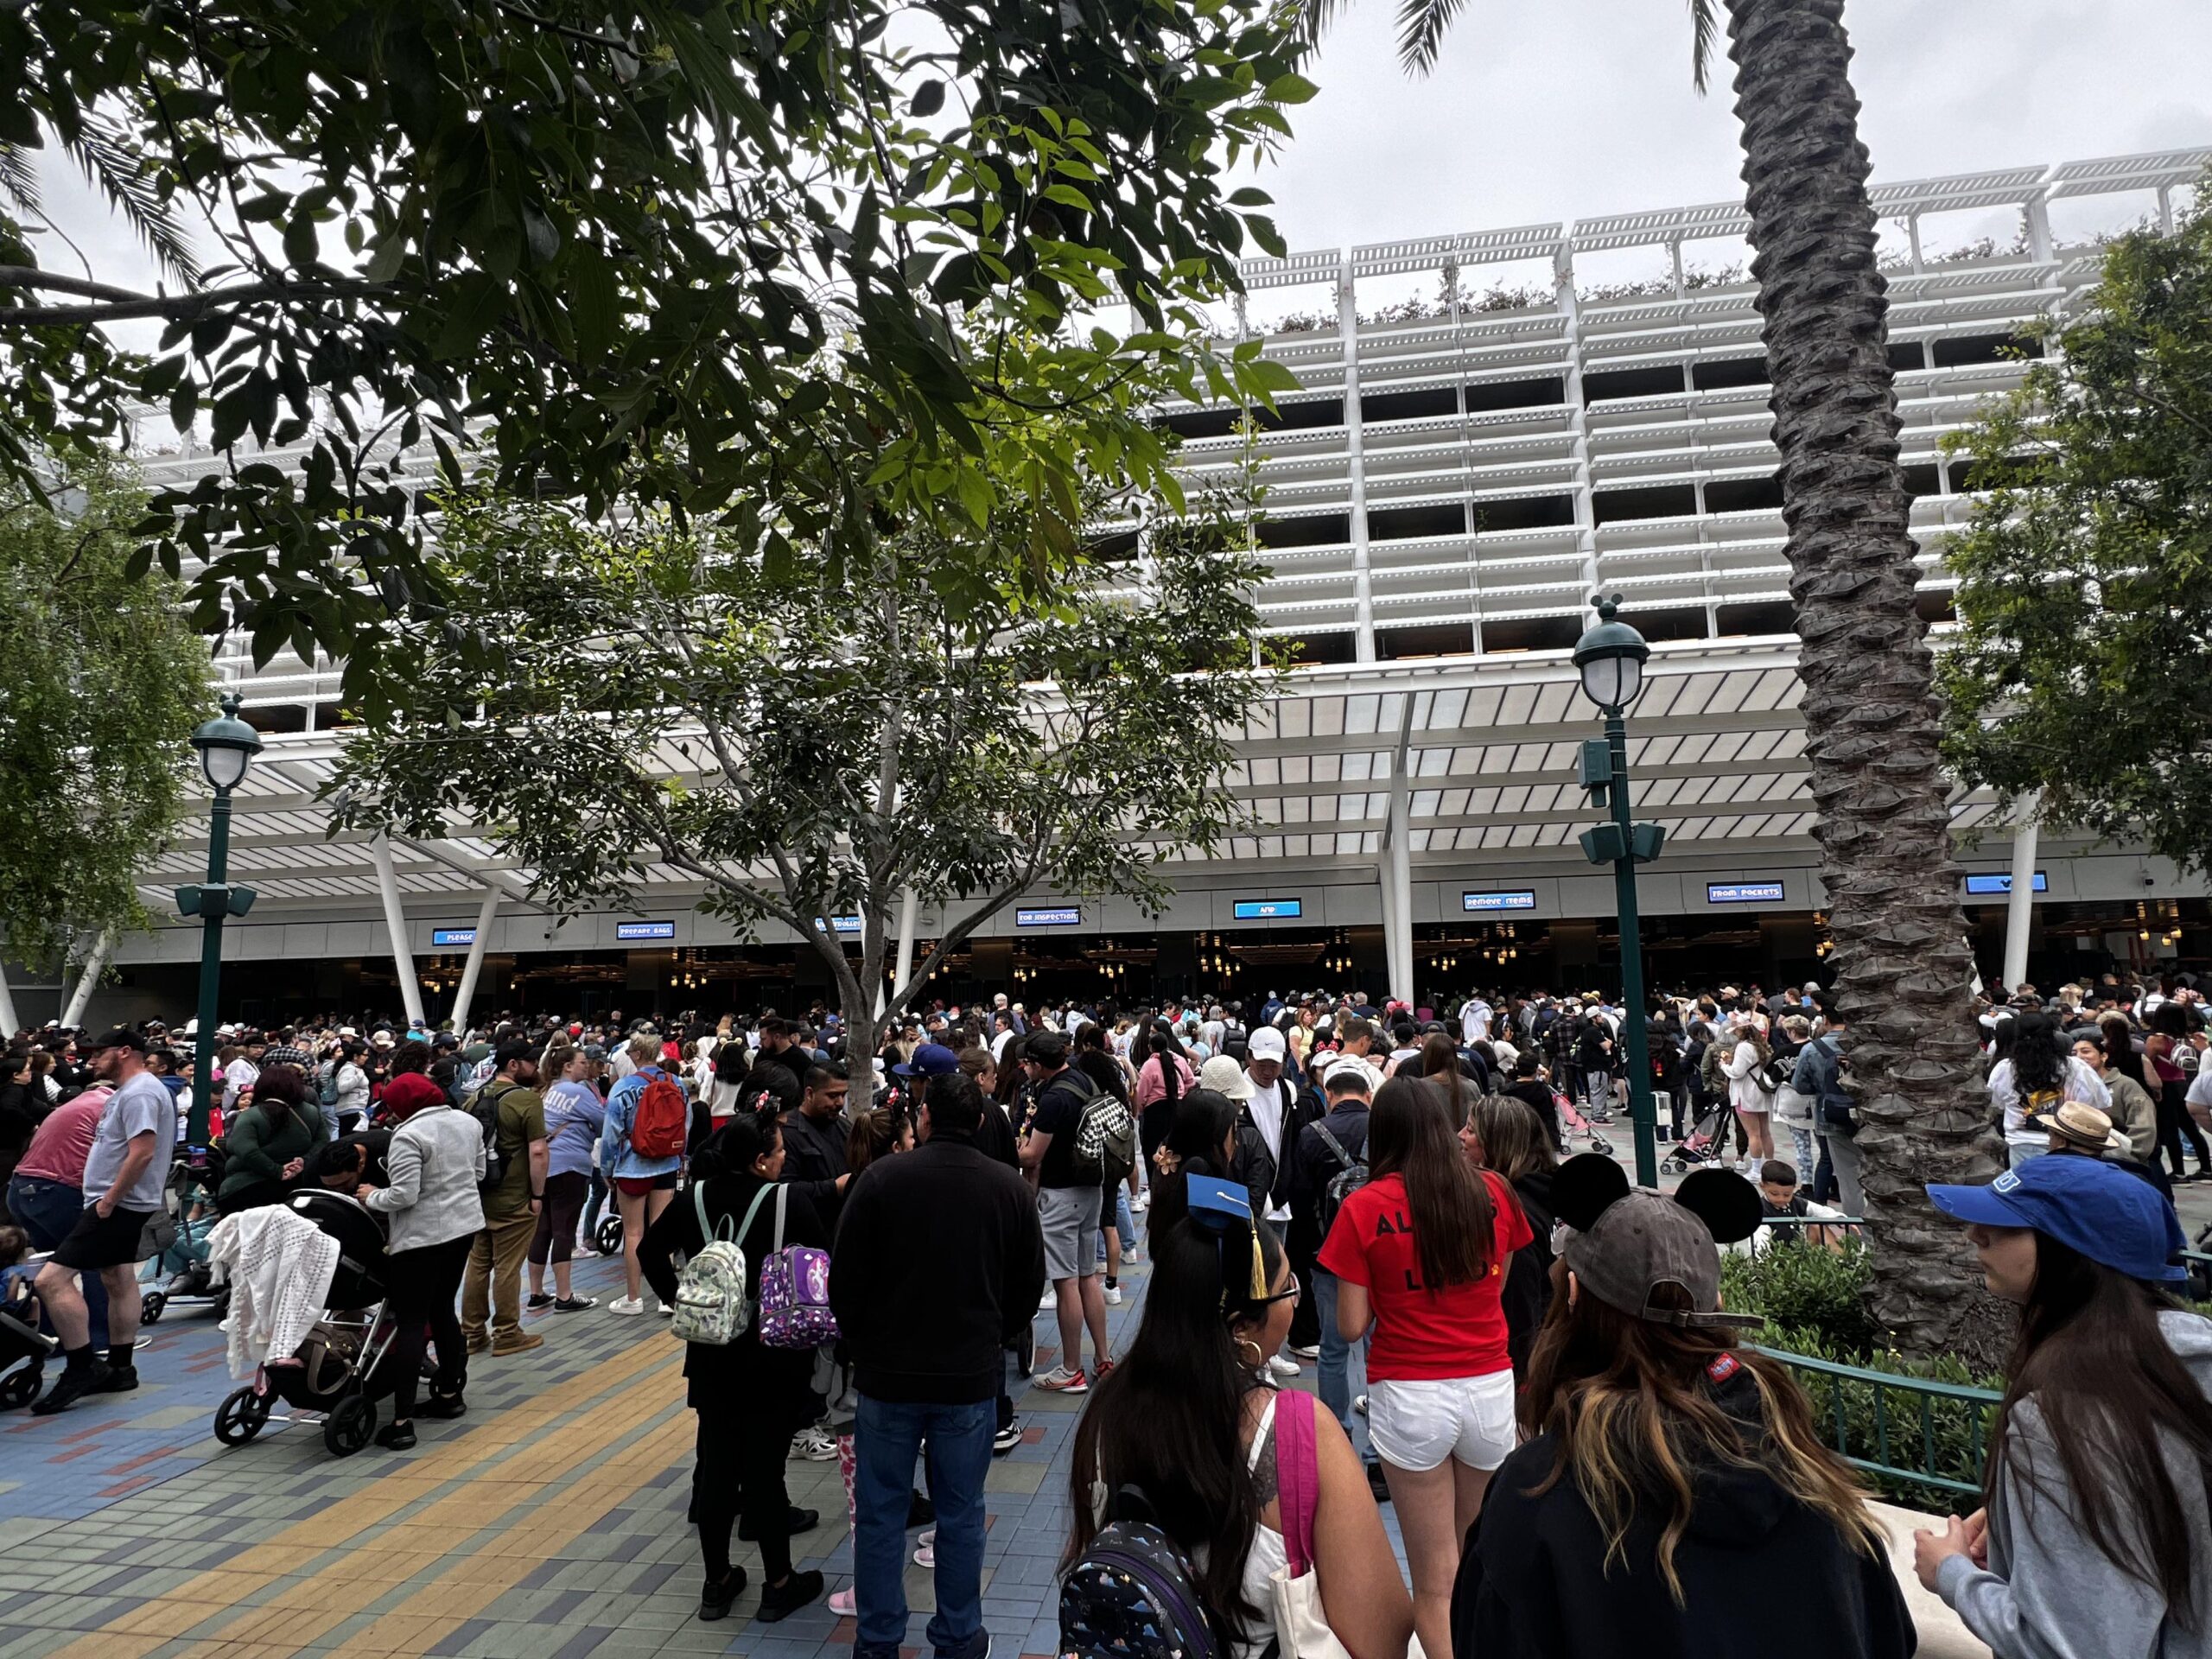 Disneyland Disaster: Frustrated Families Amid Security Line Chaos